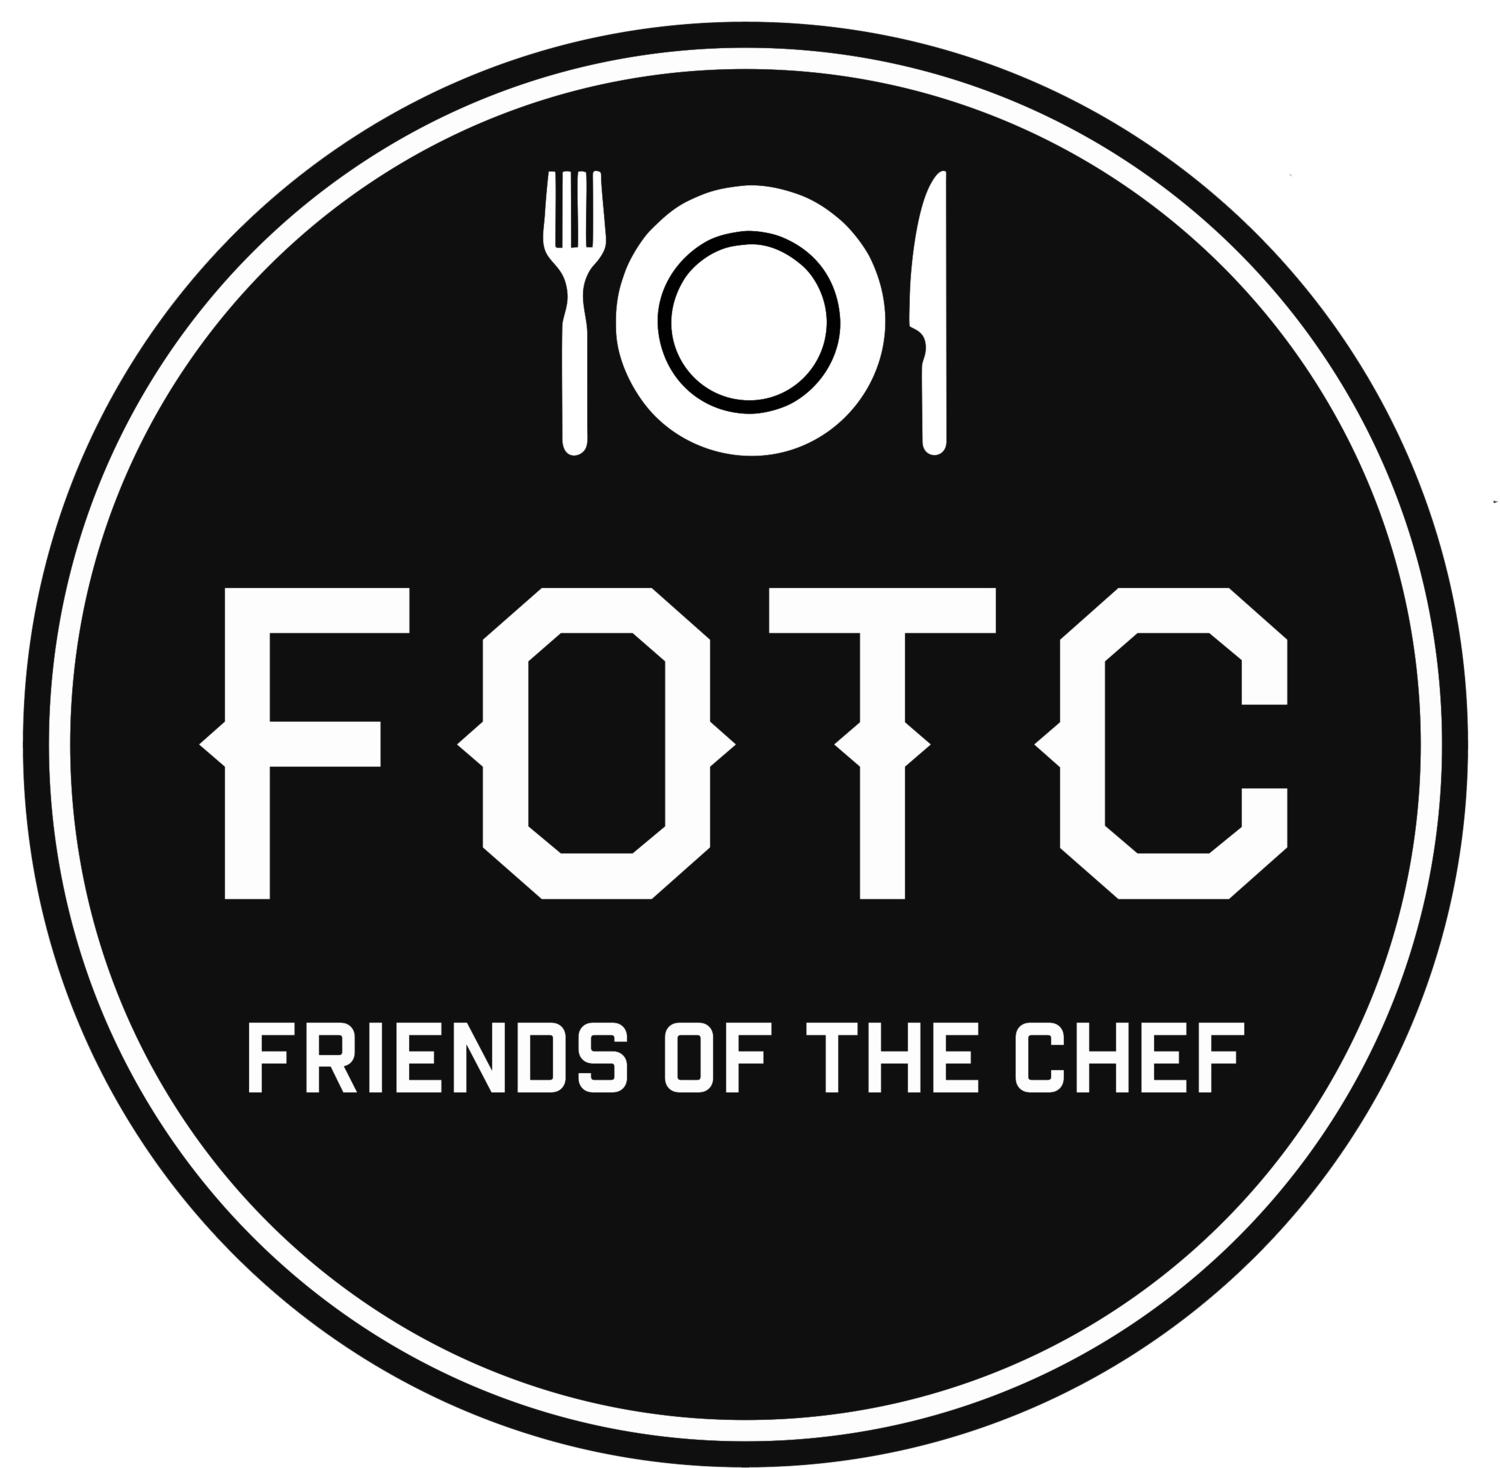 Friends of the Chef